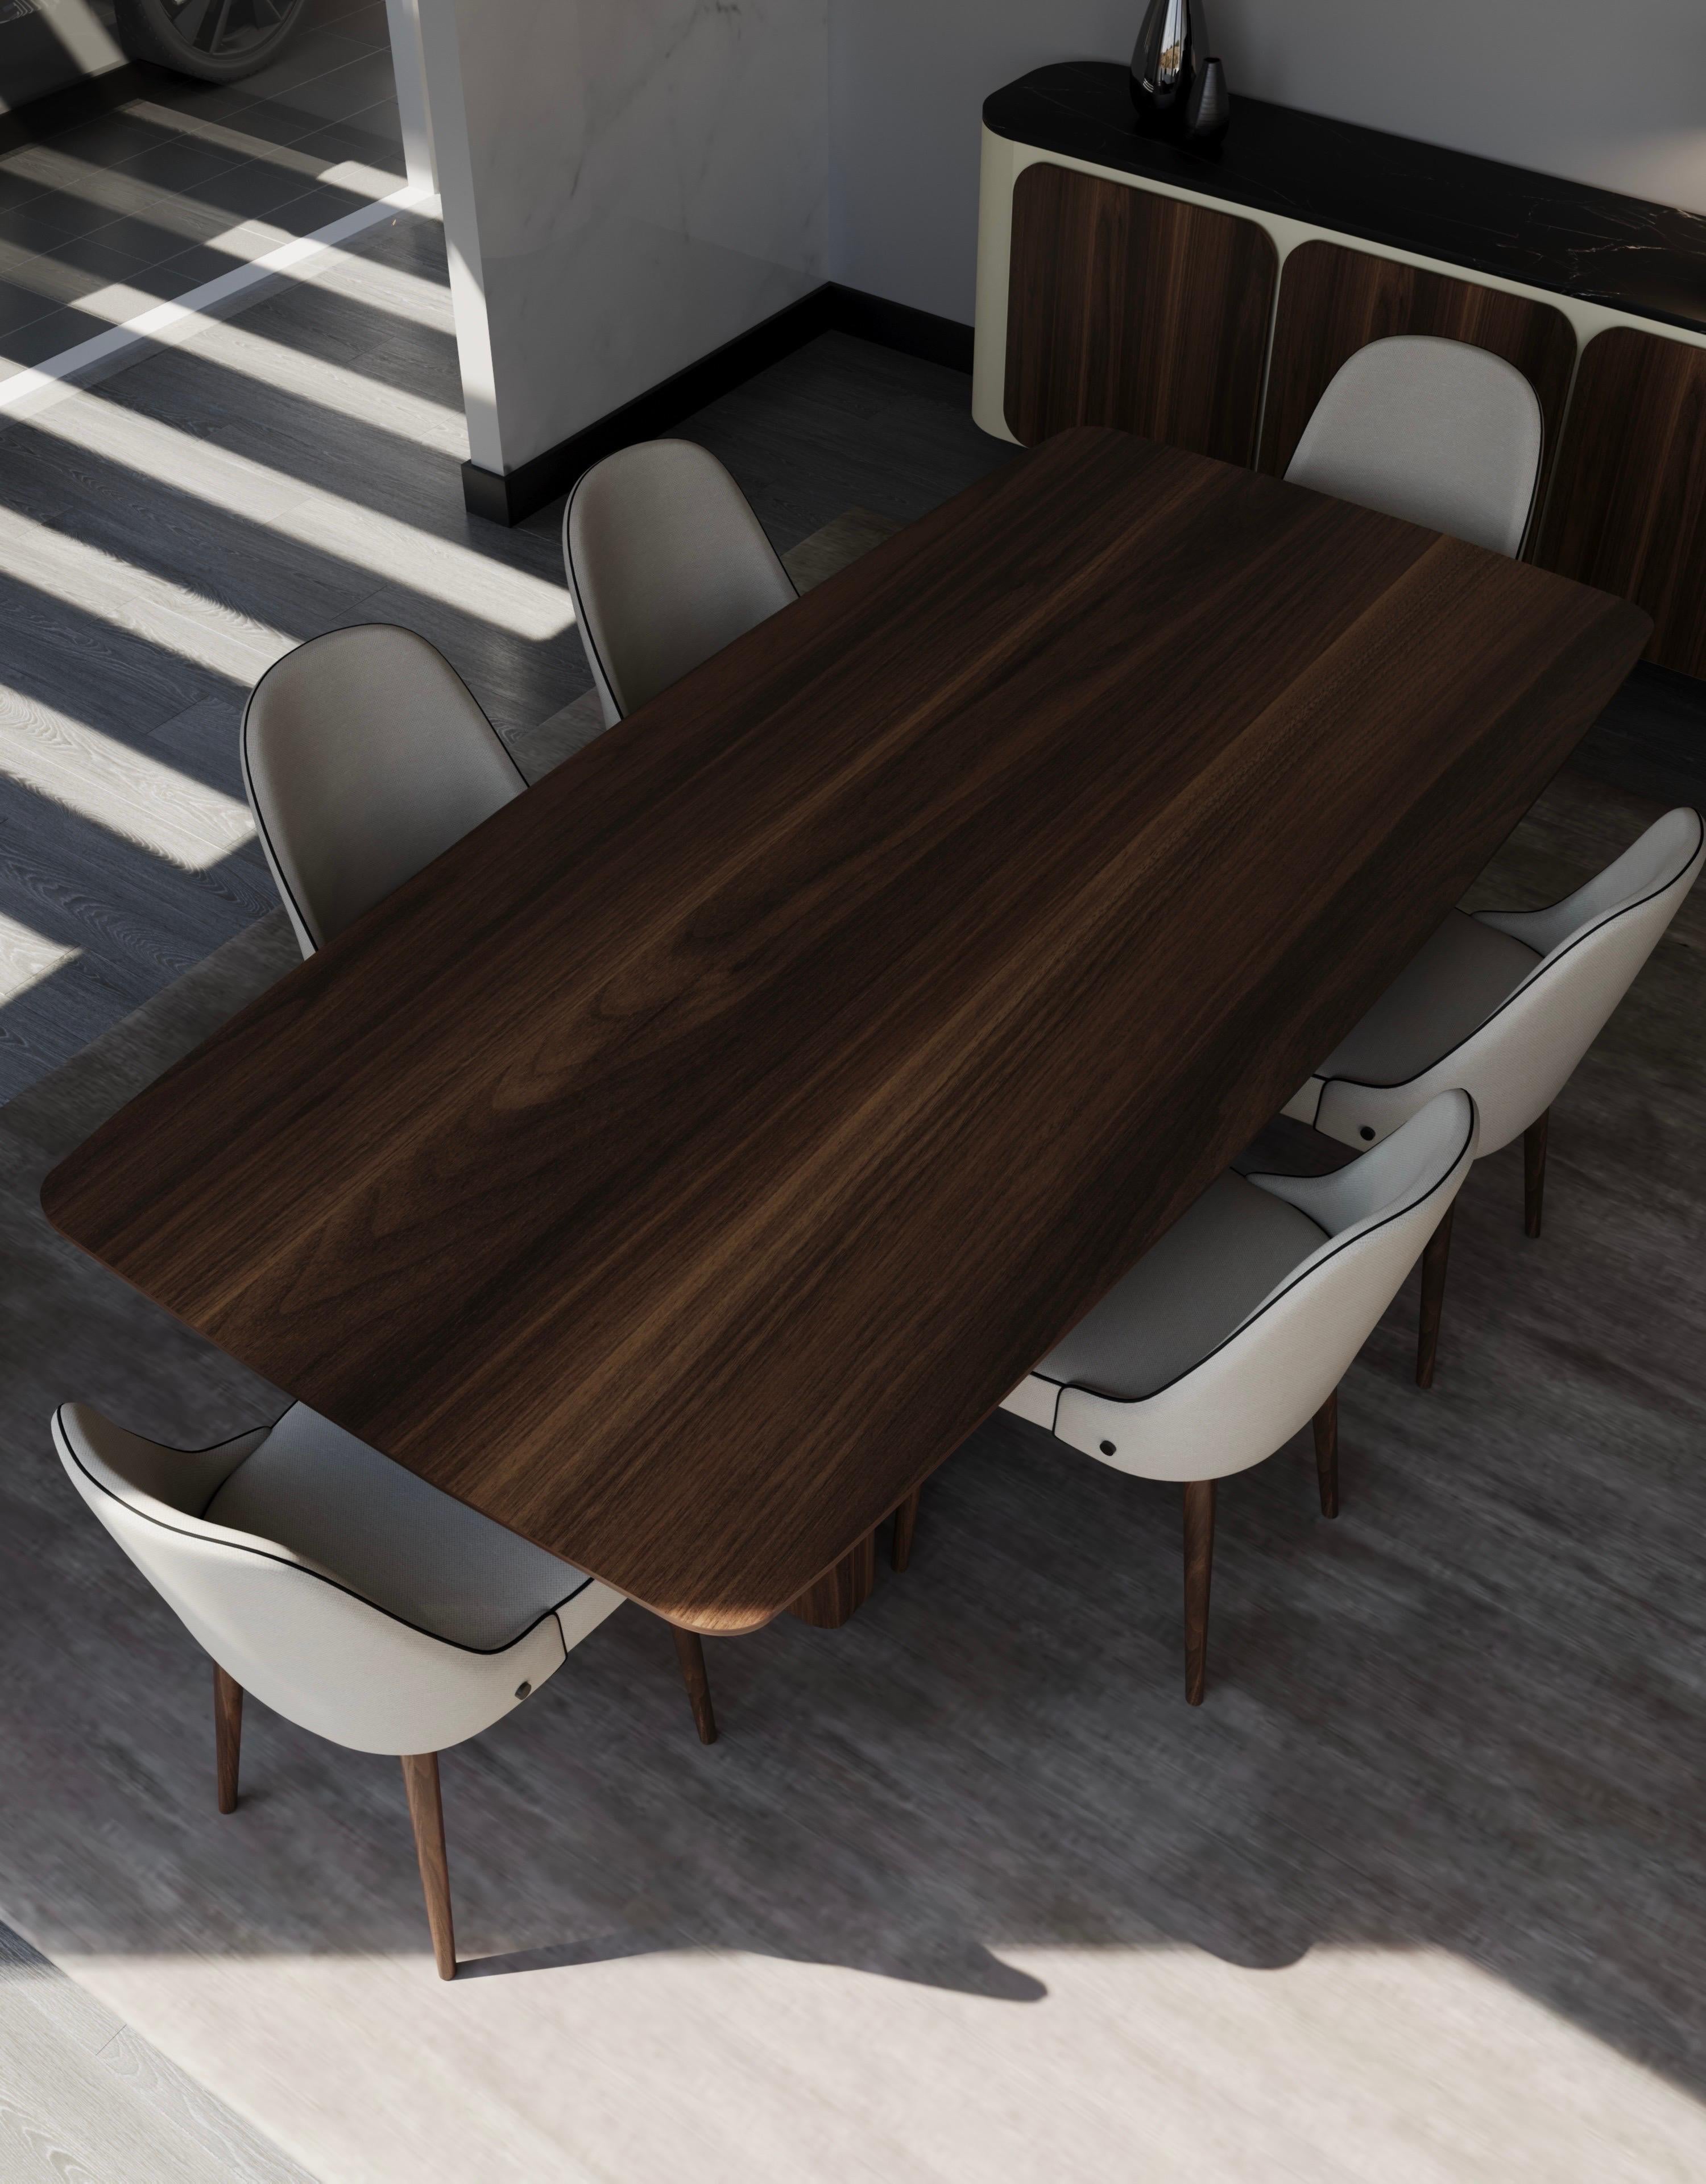 Shelby Dining Table, Portuguese 21st Century Contemporary In New Condition For Sale In Sobrosa, 13